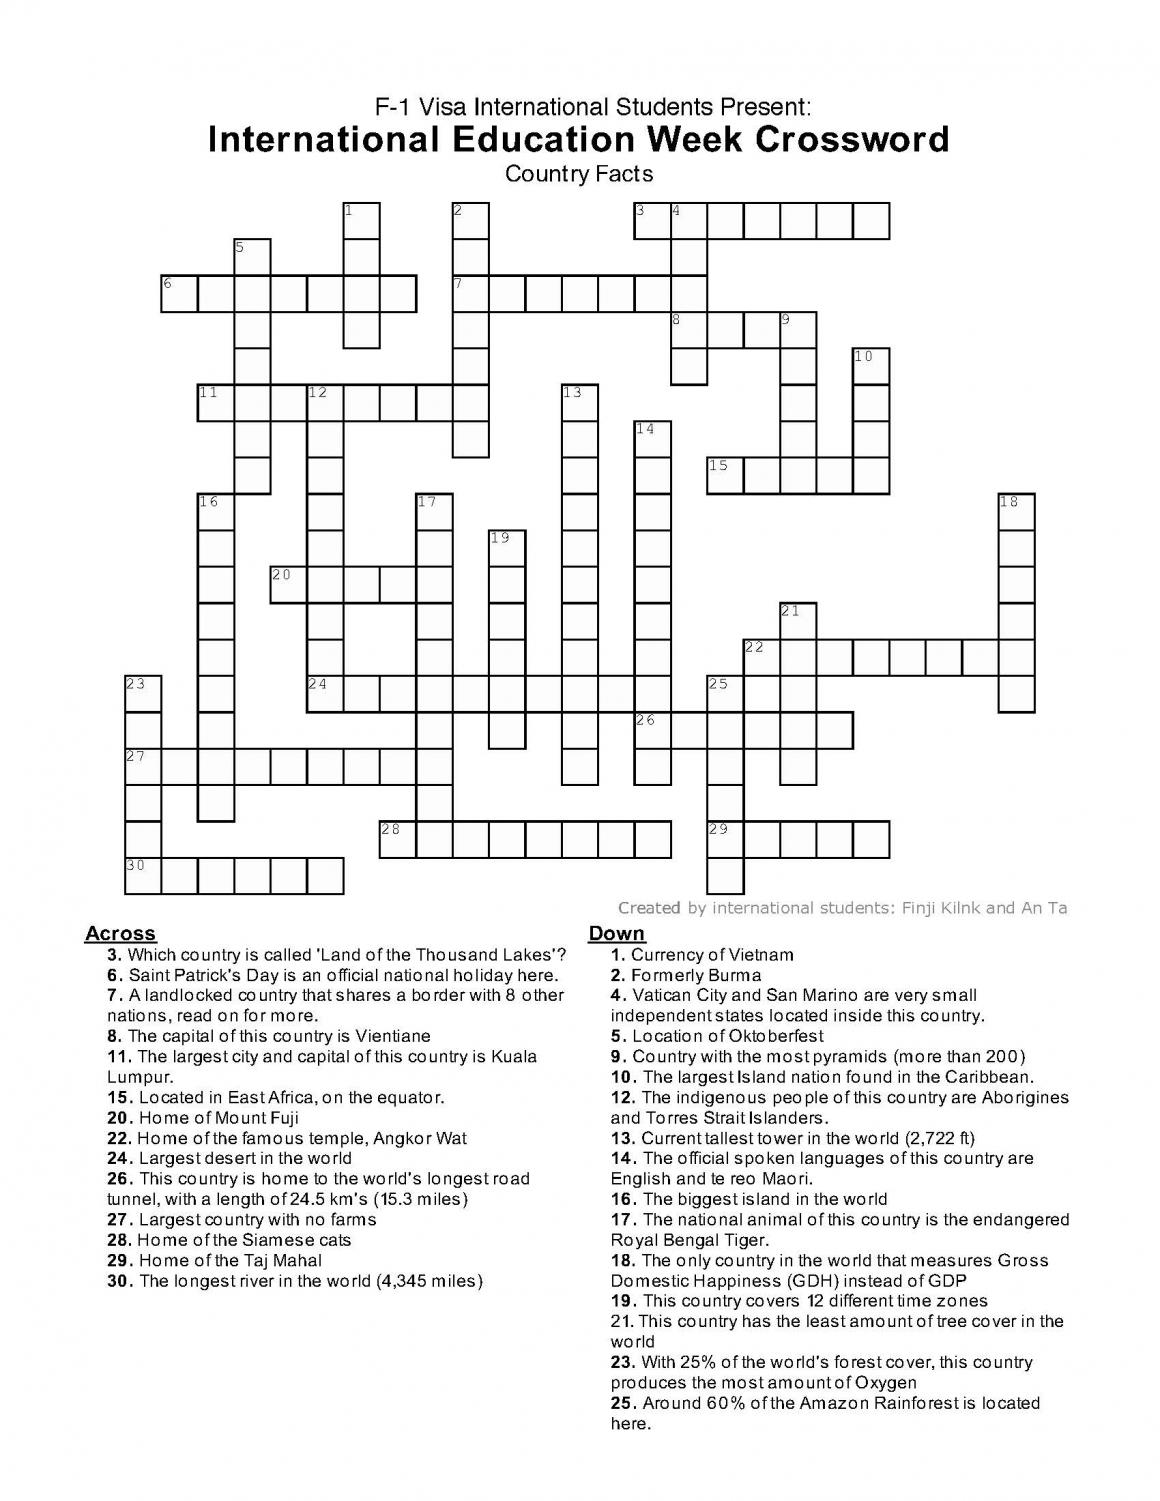 Need a break? Try this crossword puzzle put together by El Camino #39 s